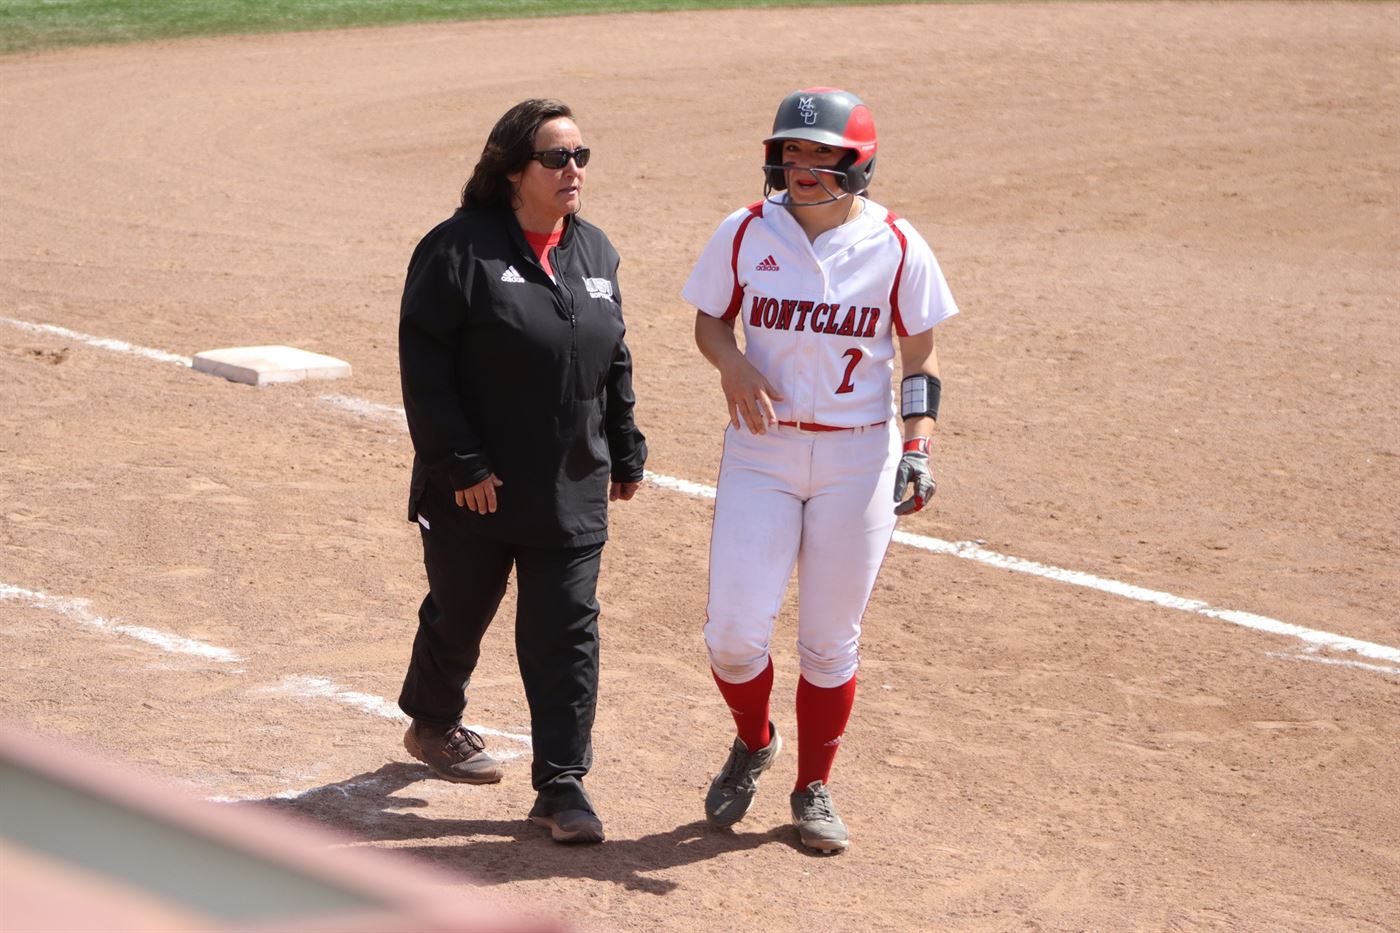 Alyssa Borozan has had a spectacular season, which has helped the Red Hawks to get to the playoffs. Trevor Giesberg | The Montclarion